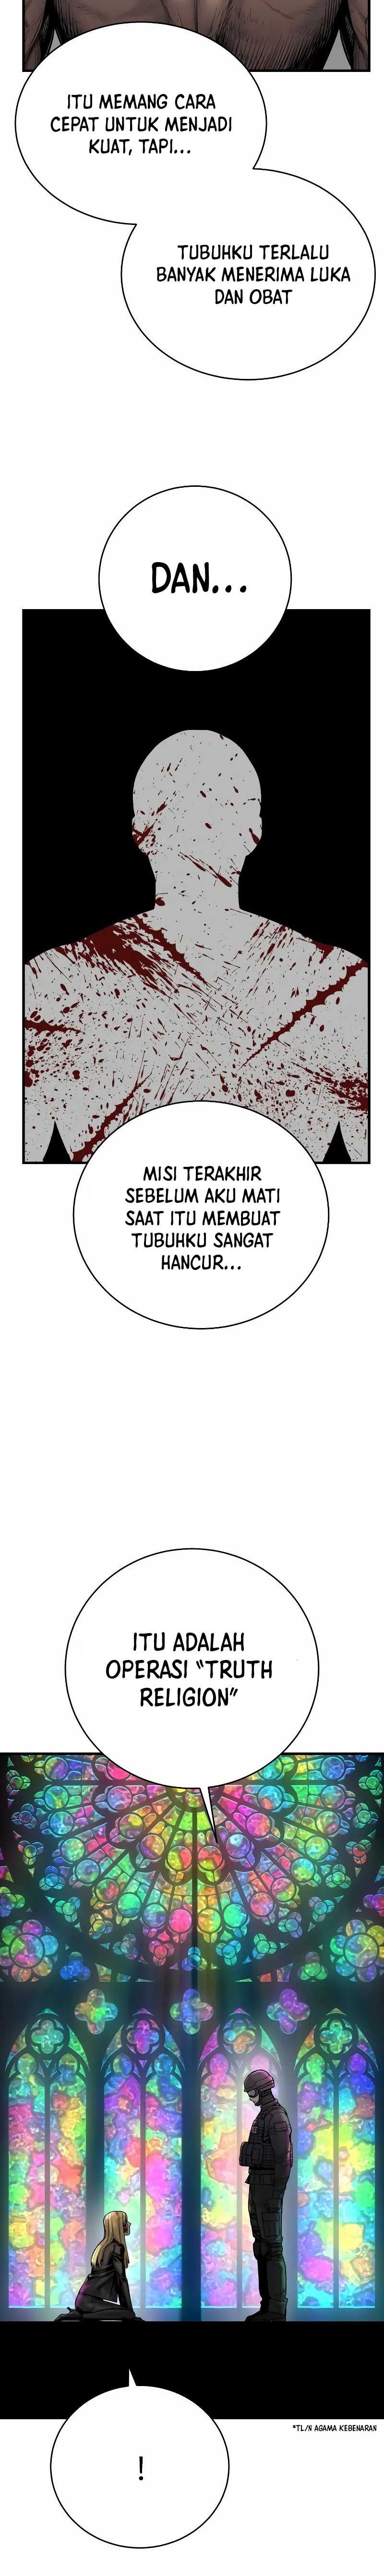 Return of the Bloodthirsty Police Chapter 23